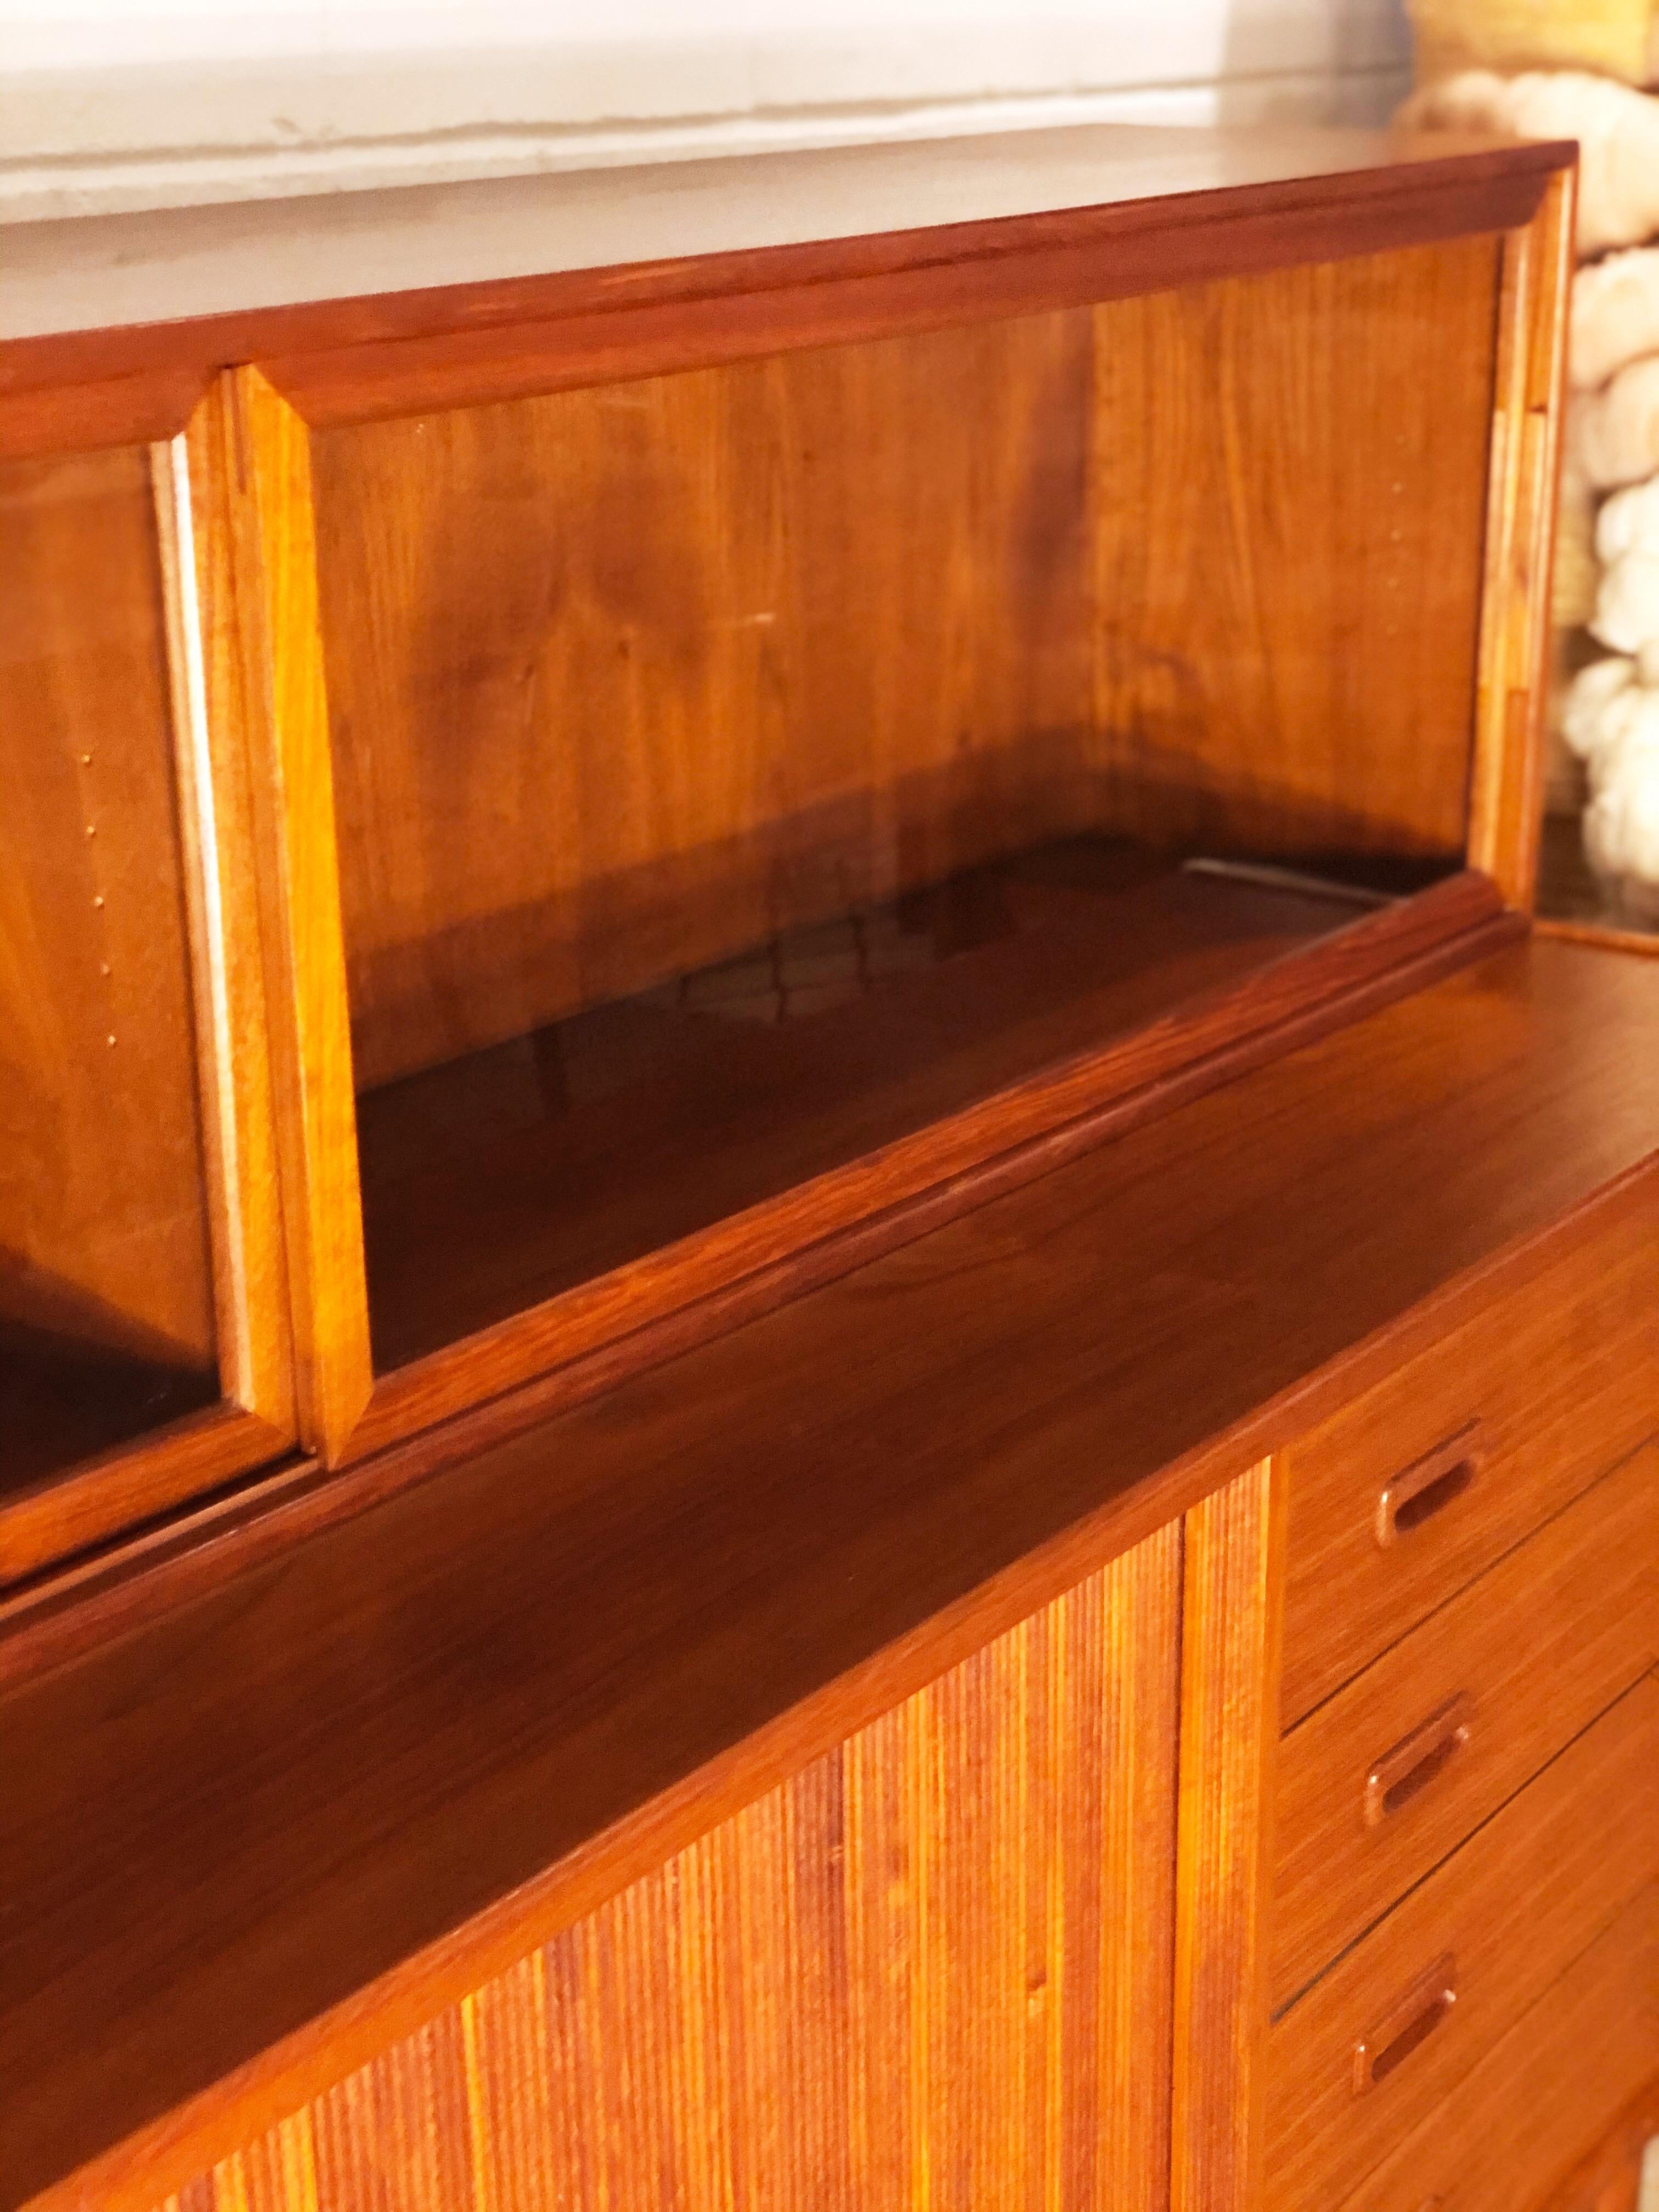 This vintage Danish modern teak credenza with removable upper display wood framed glass cabinet designed by Peter Hvidt is in overall excellent condition. This credenza features thick tambour doors, with interior shelving and drawers with sculpted